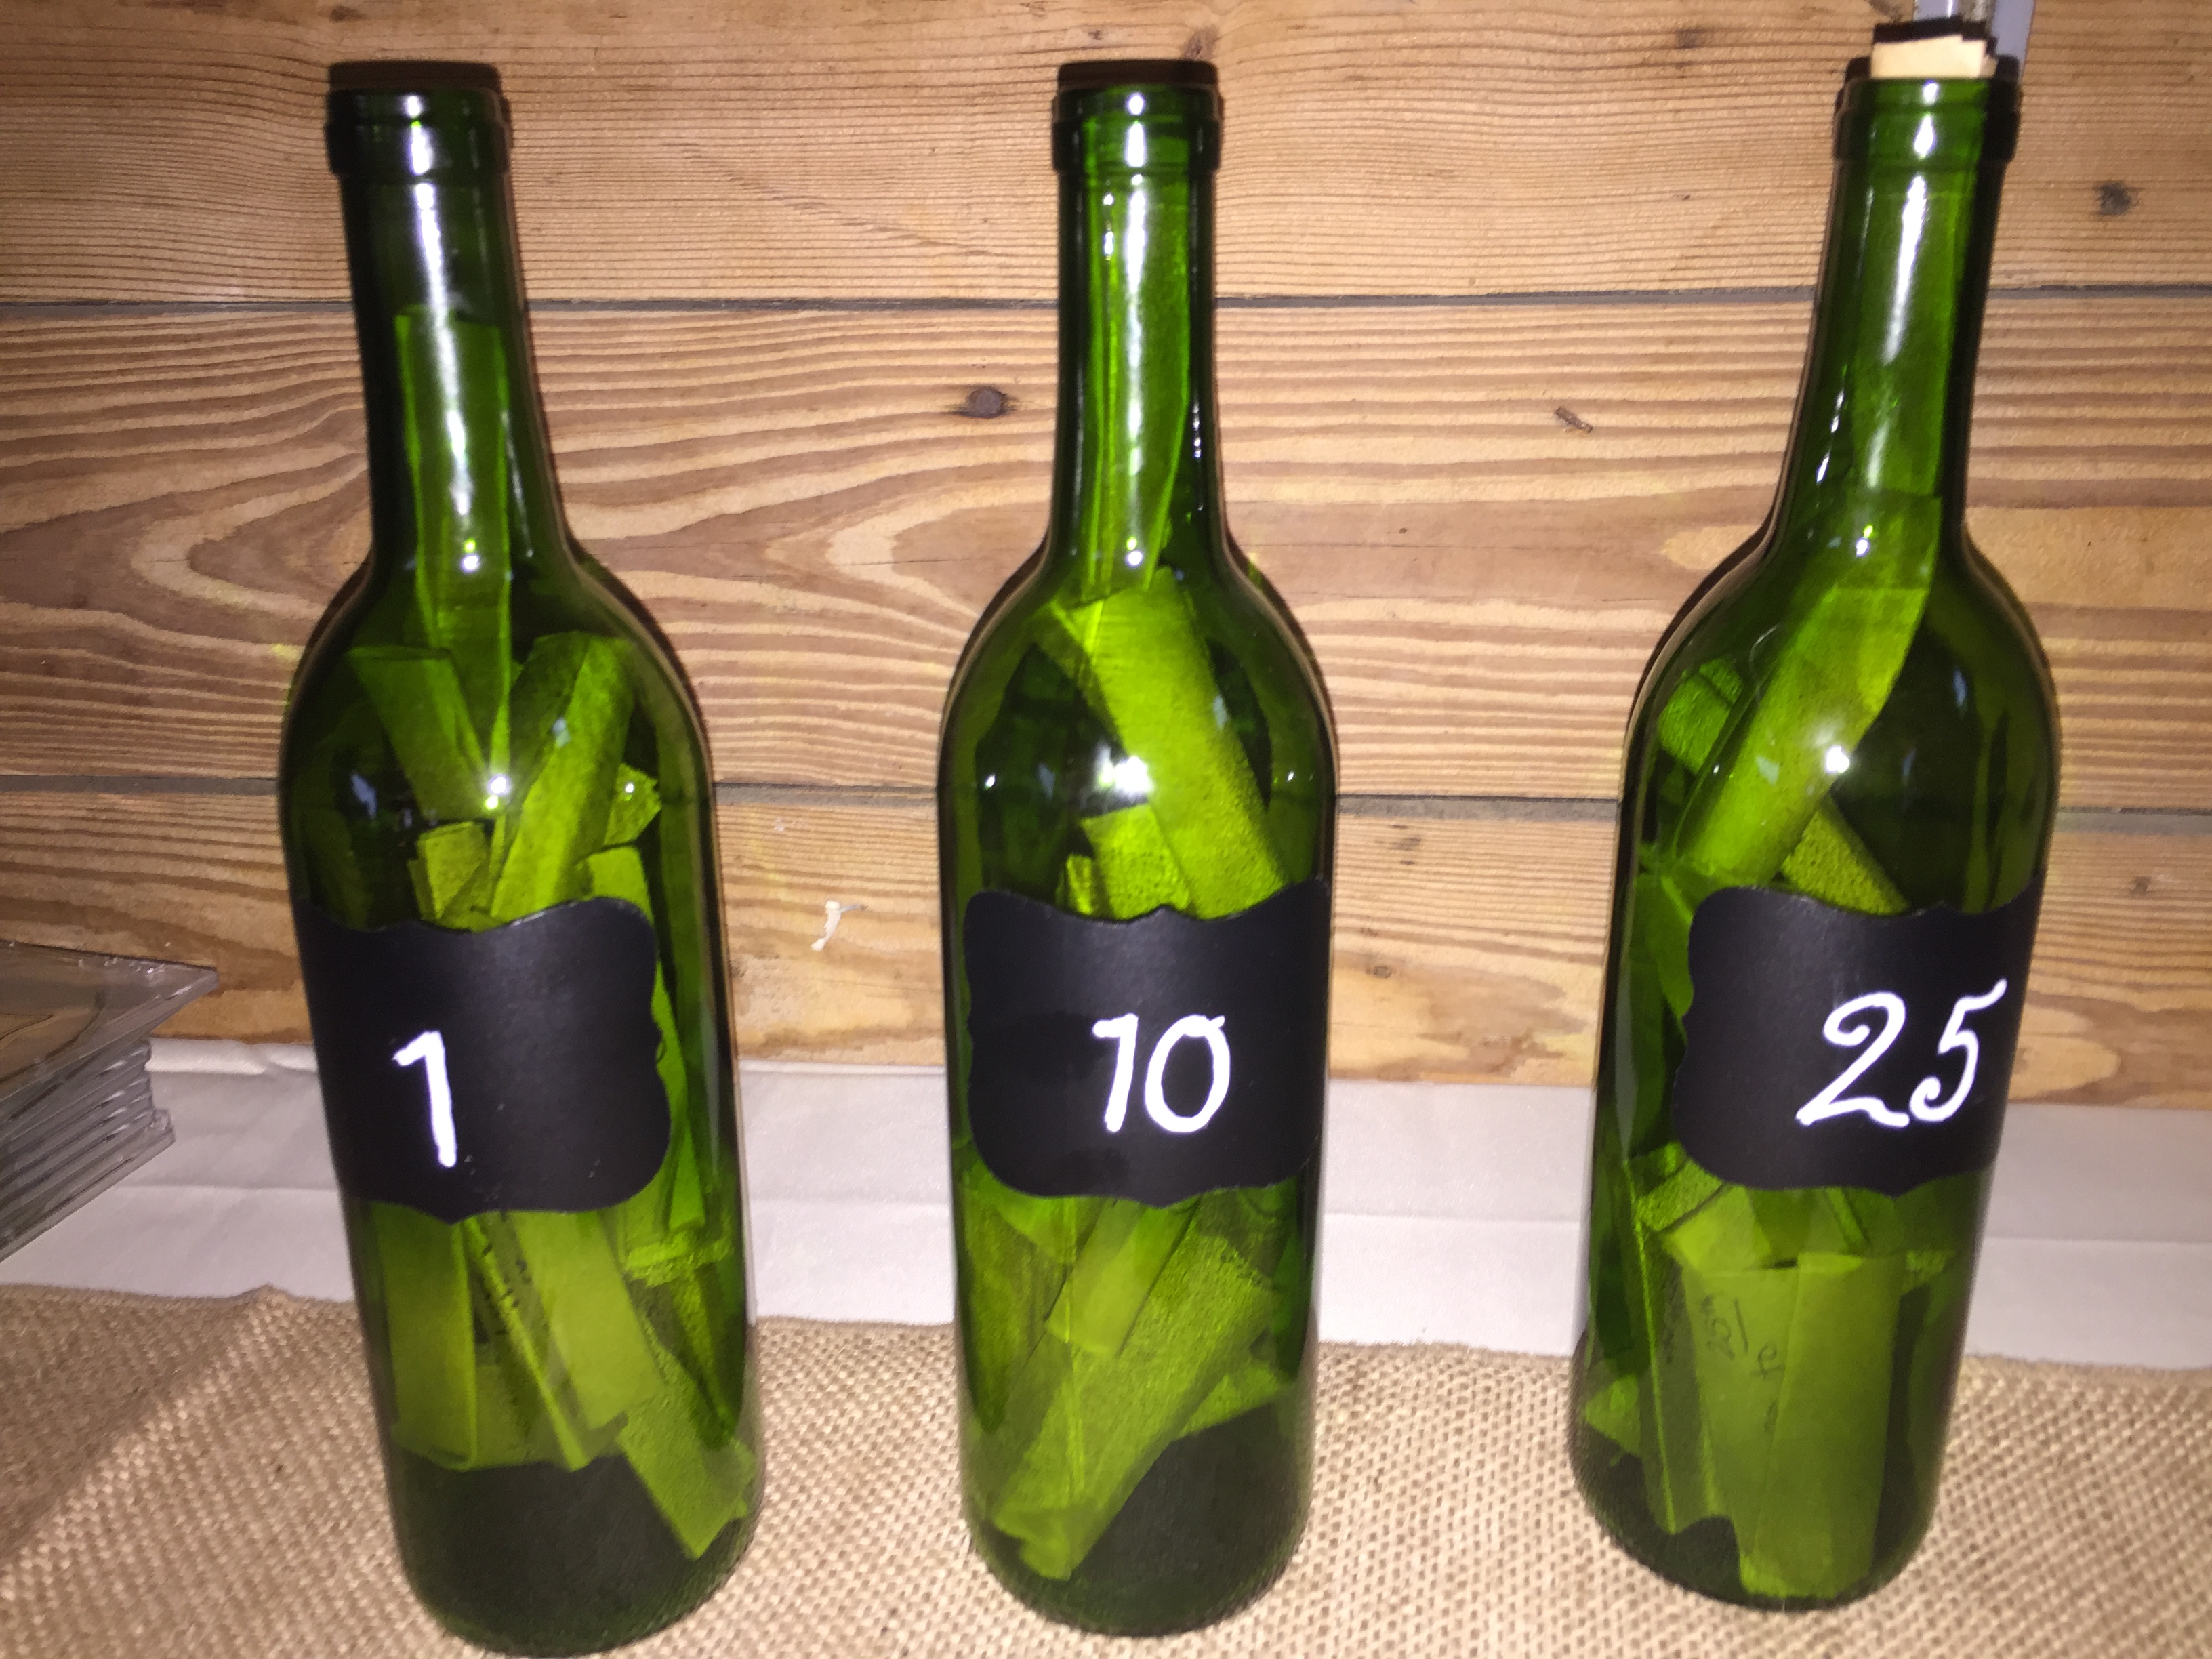 Put numbers on the bottles to signify the year of the anniversary